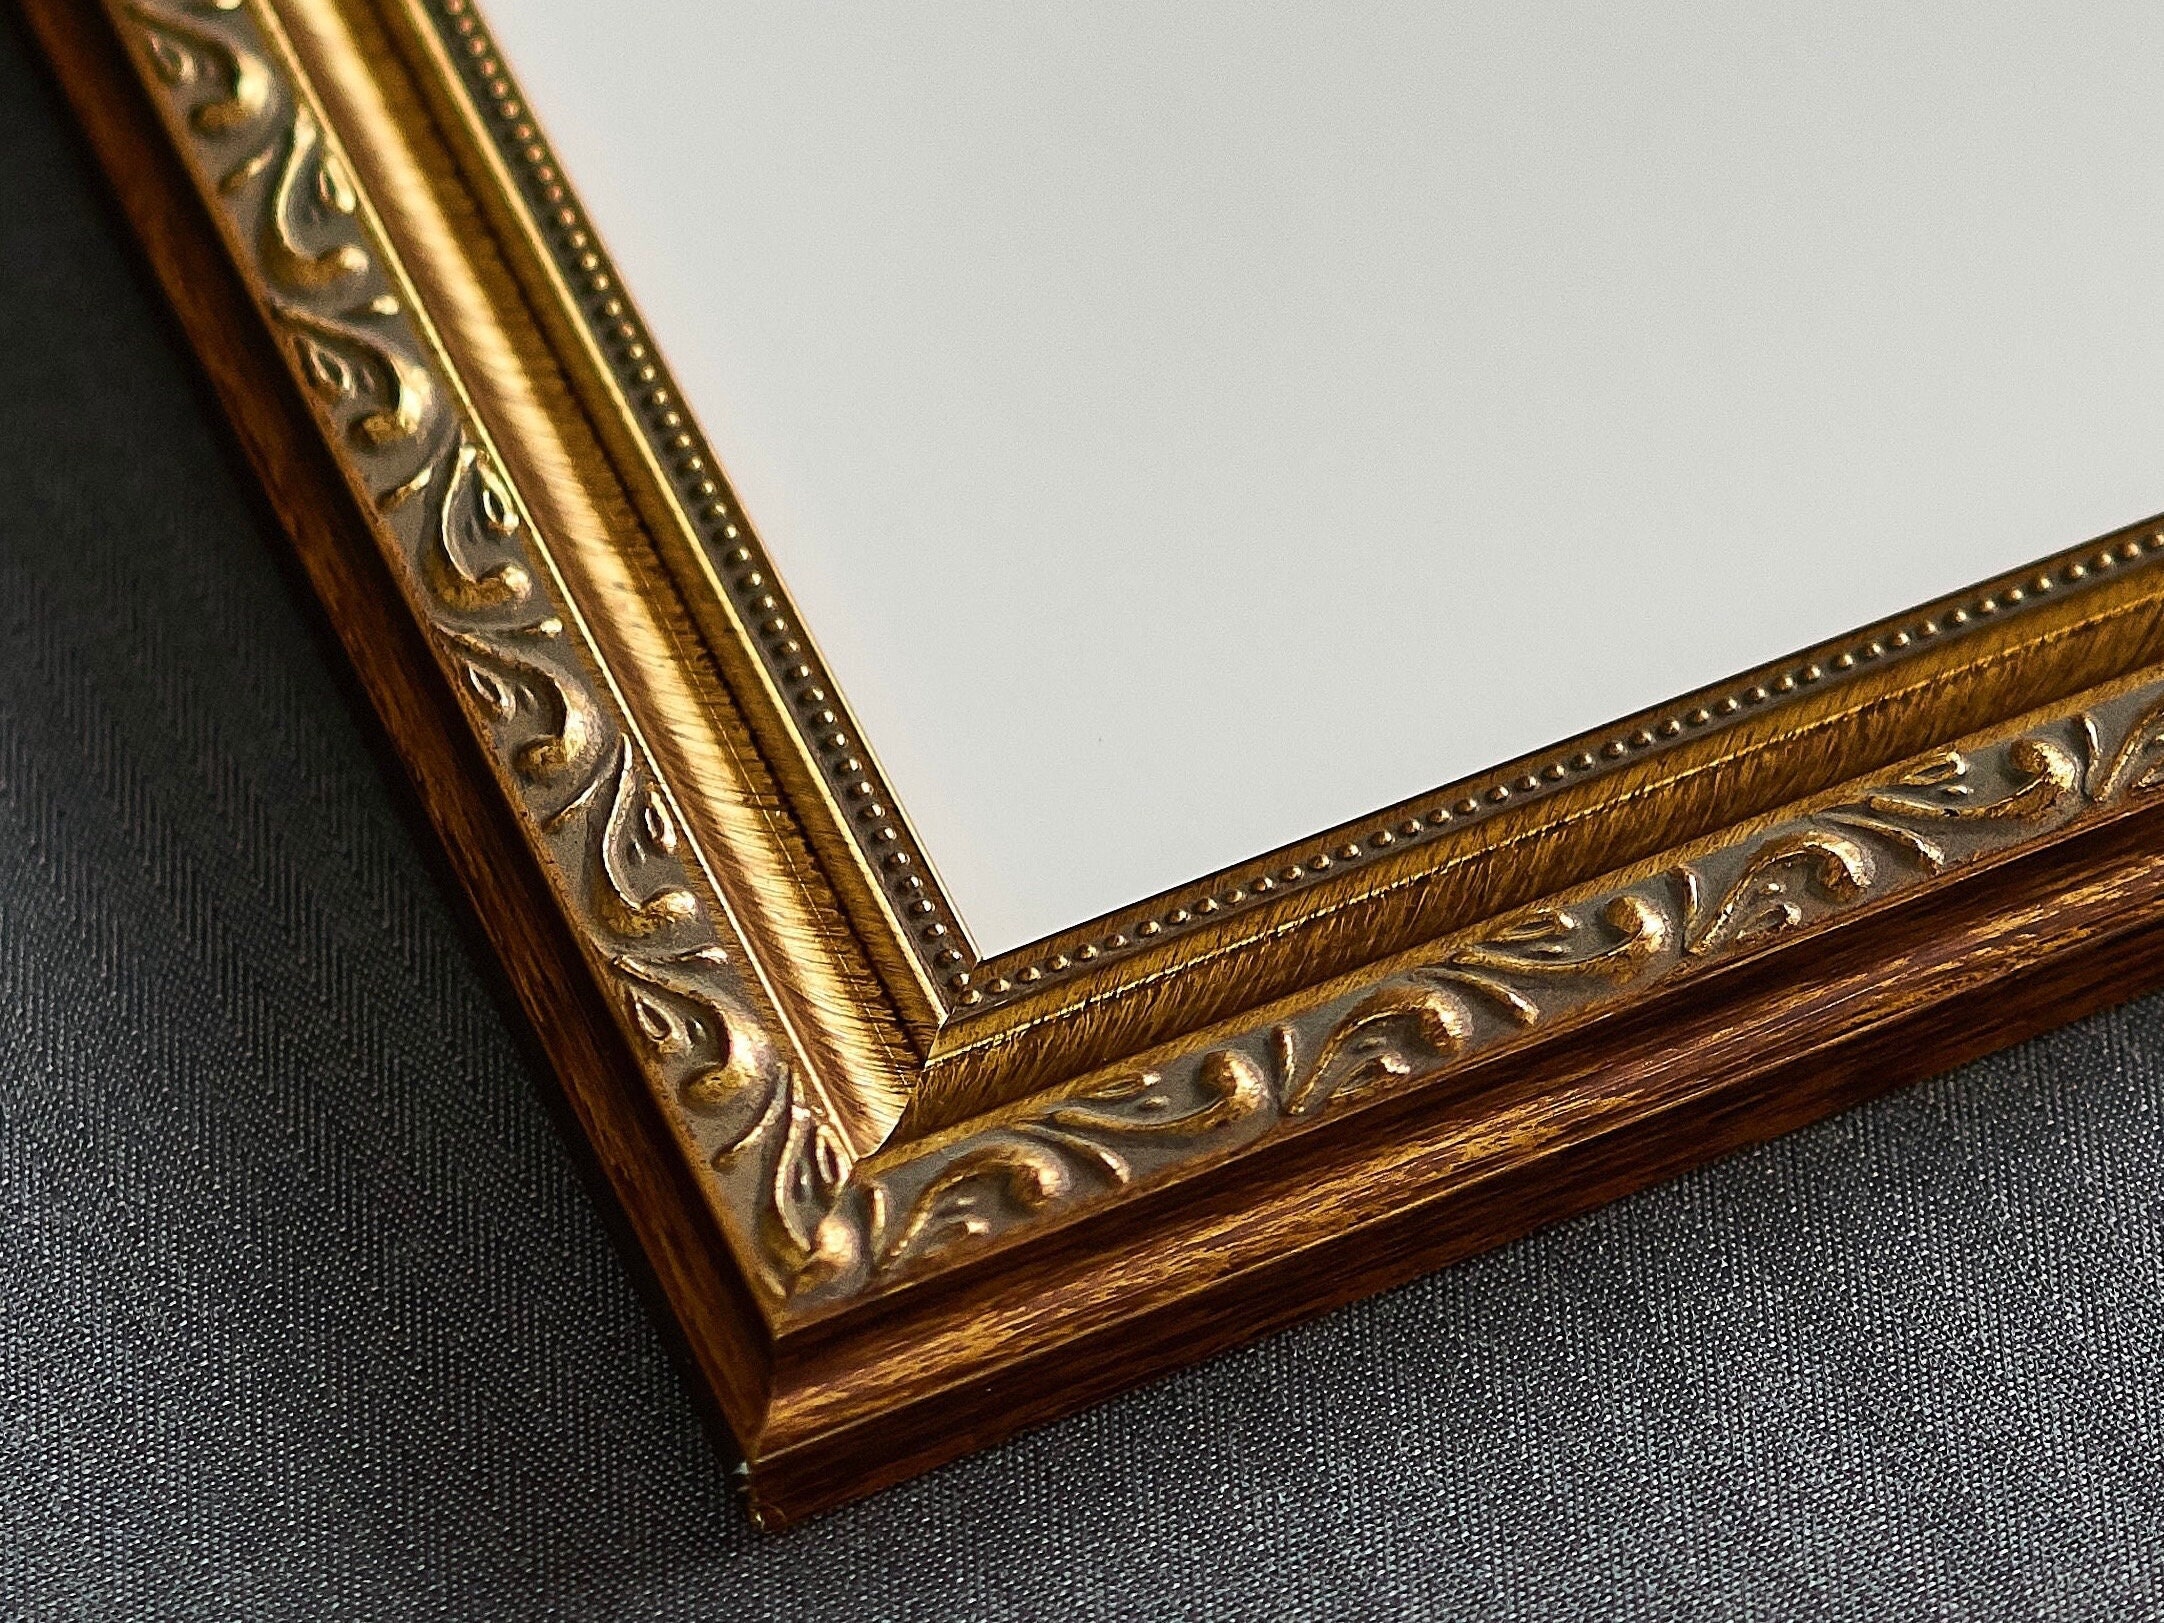 Scrolled Picture Frame, Ornate Picture Frame, Gold Picture Frame